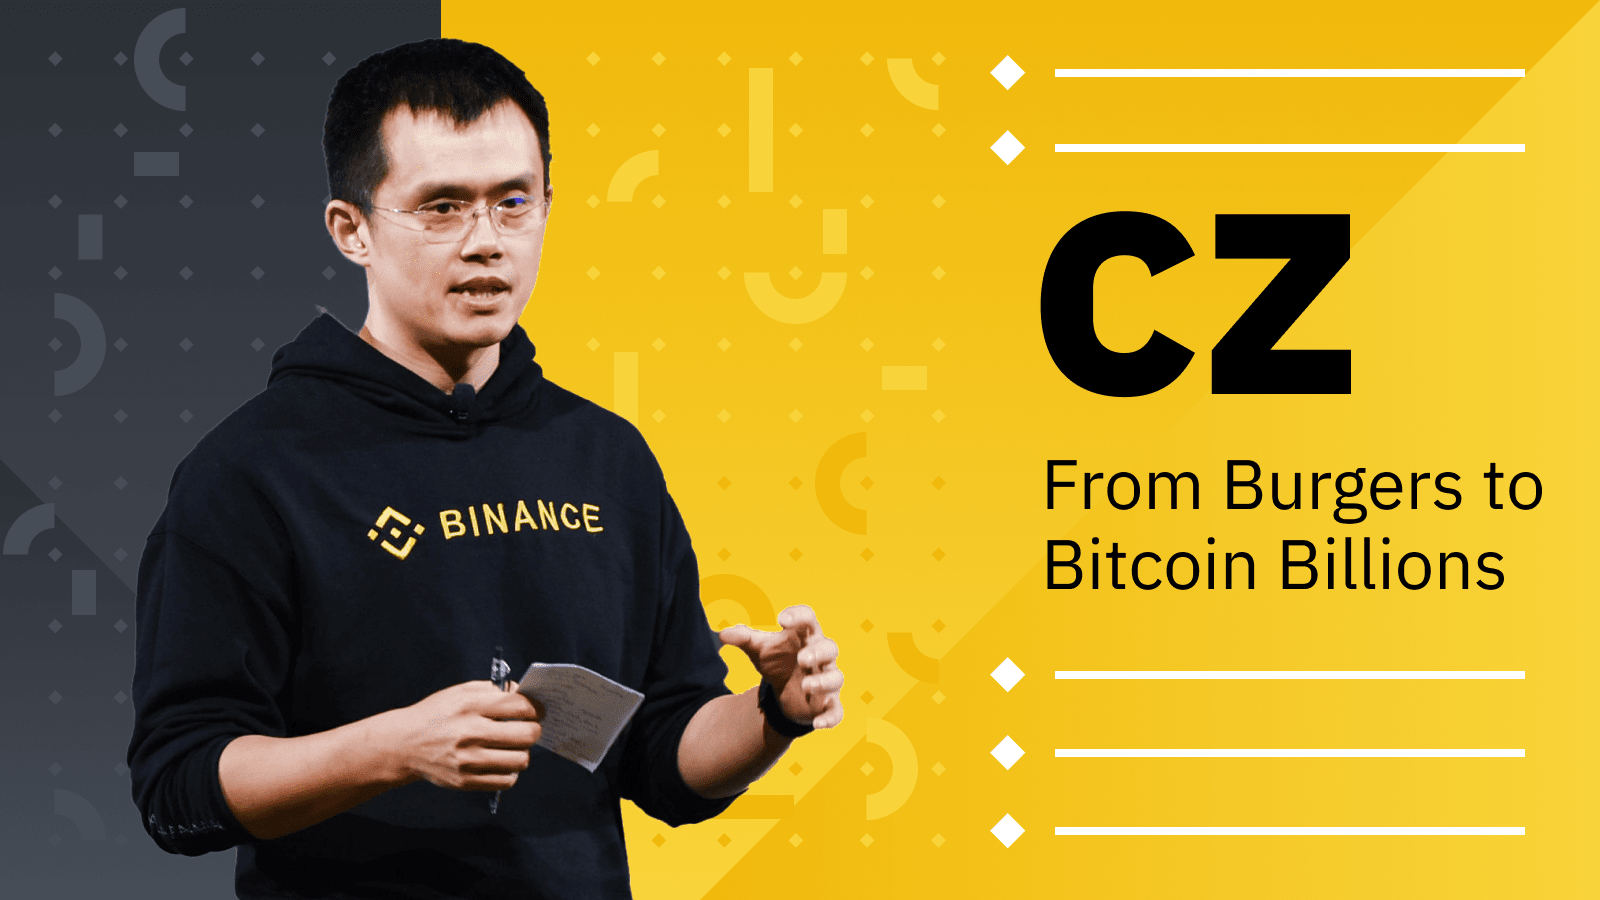 Binance Founder and CEO Changpeng Zhao